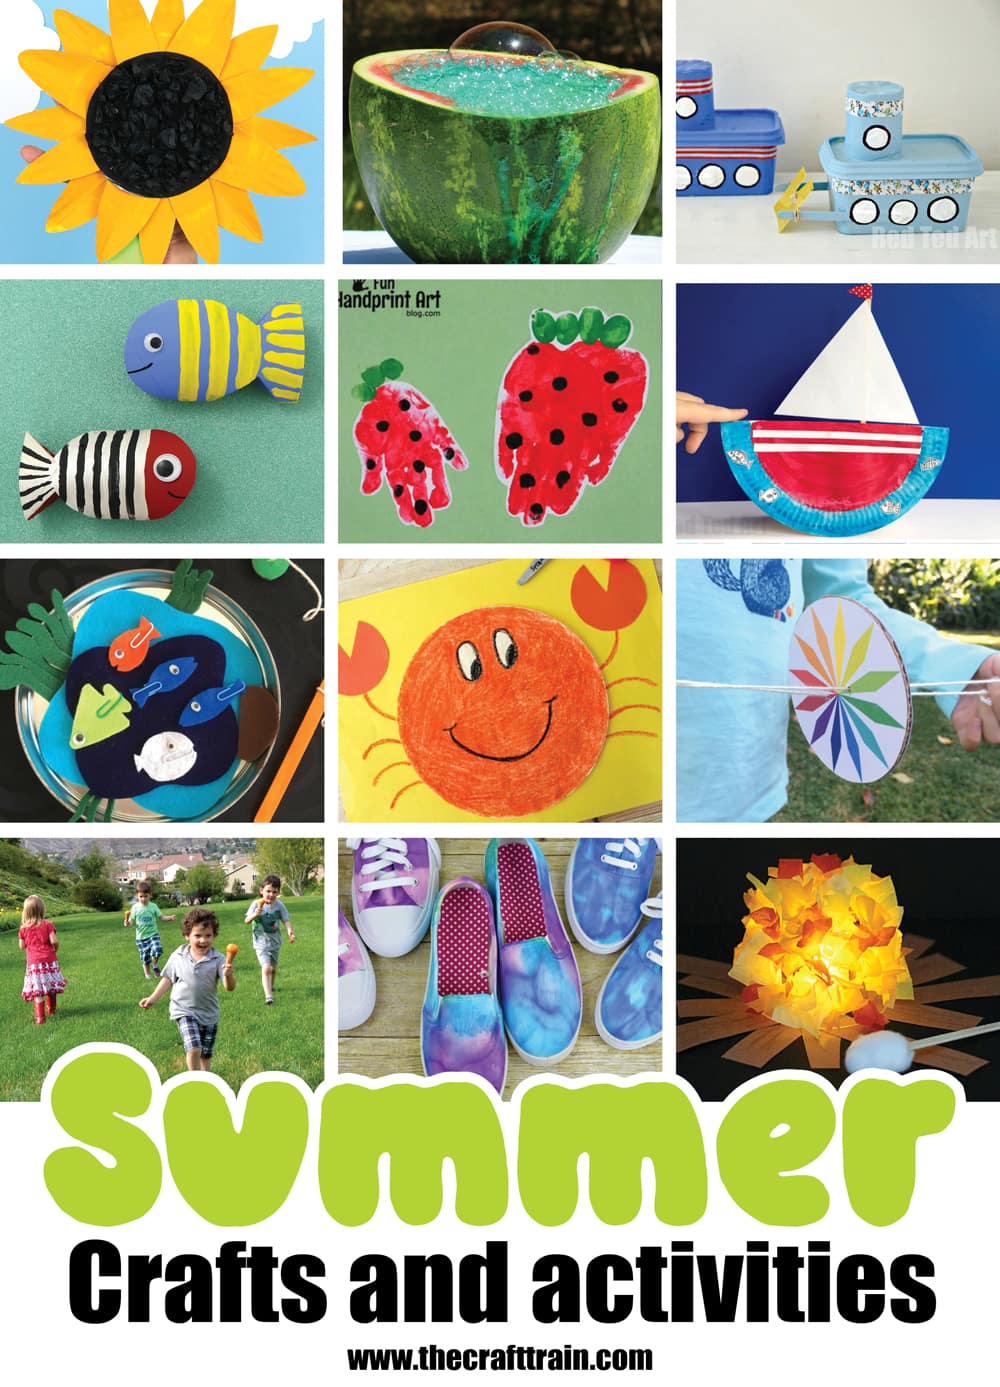 Summer crafts for kids – over 80 awesome crafts, art projects, messy play ideas, experiments, fabric art, printables, DIY toys and more